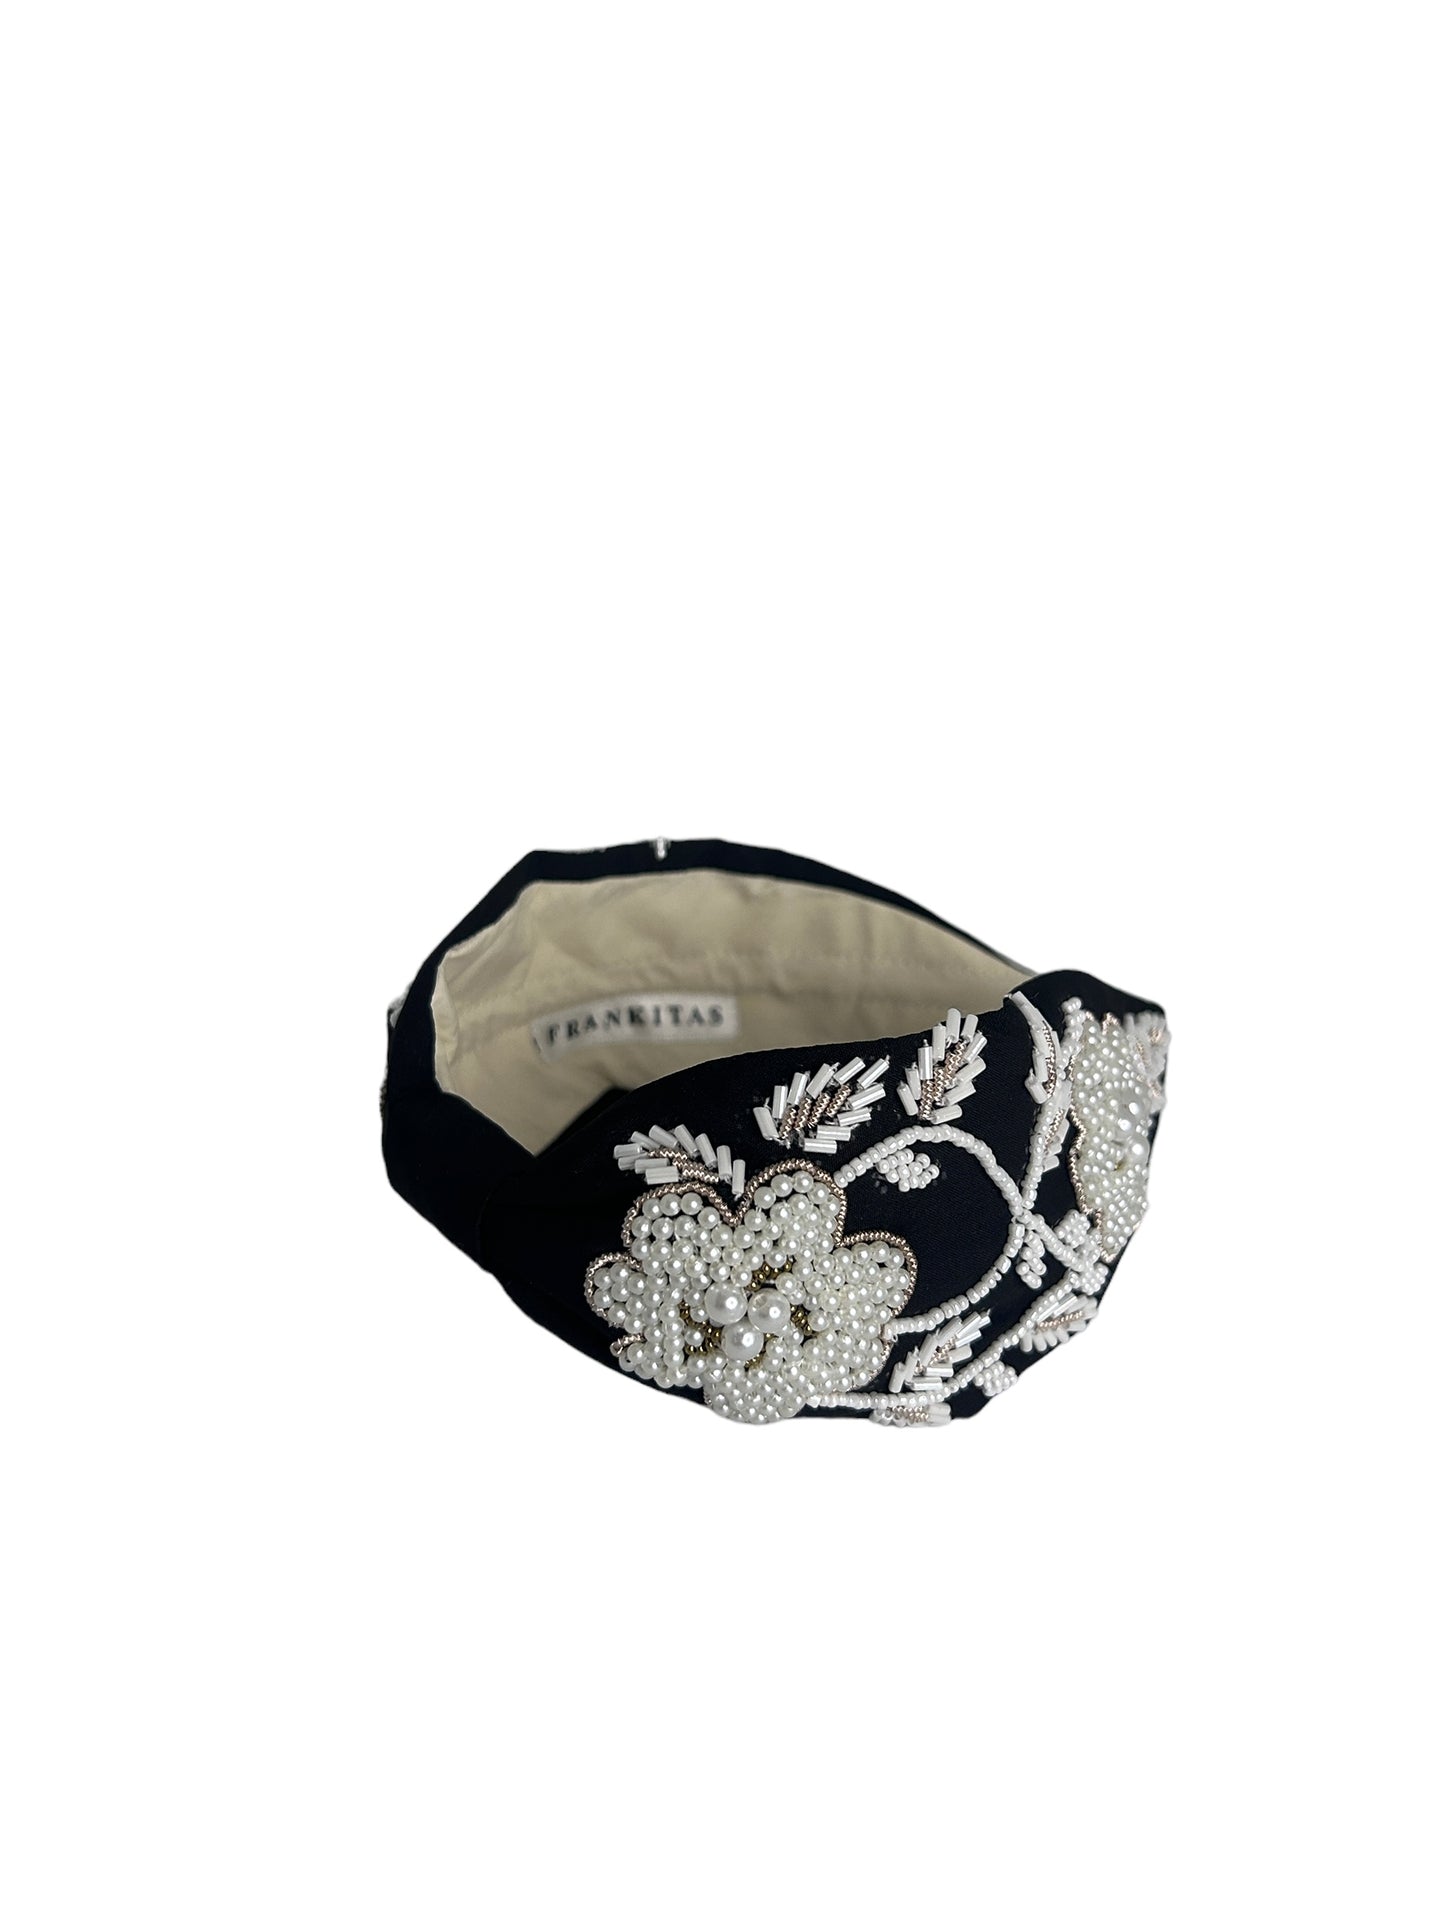 Headbands - Classic Black with White Flowers